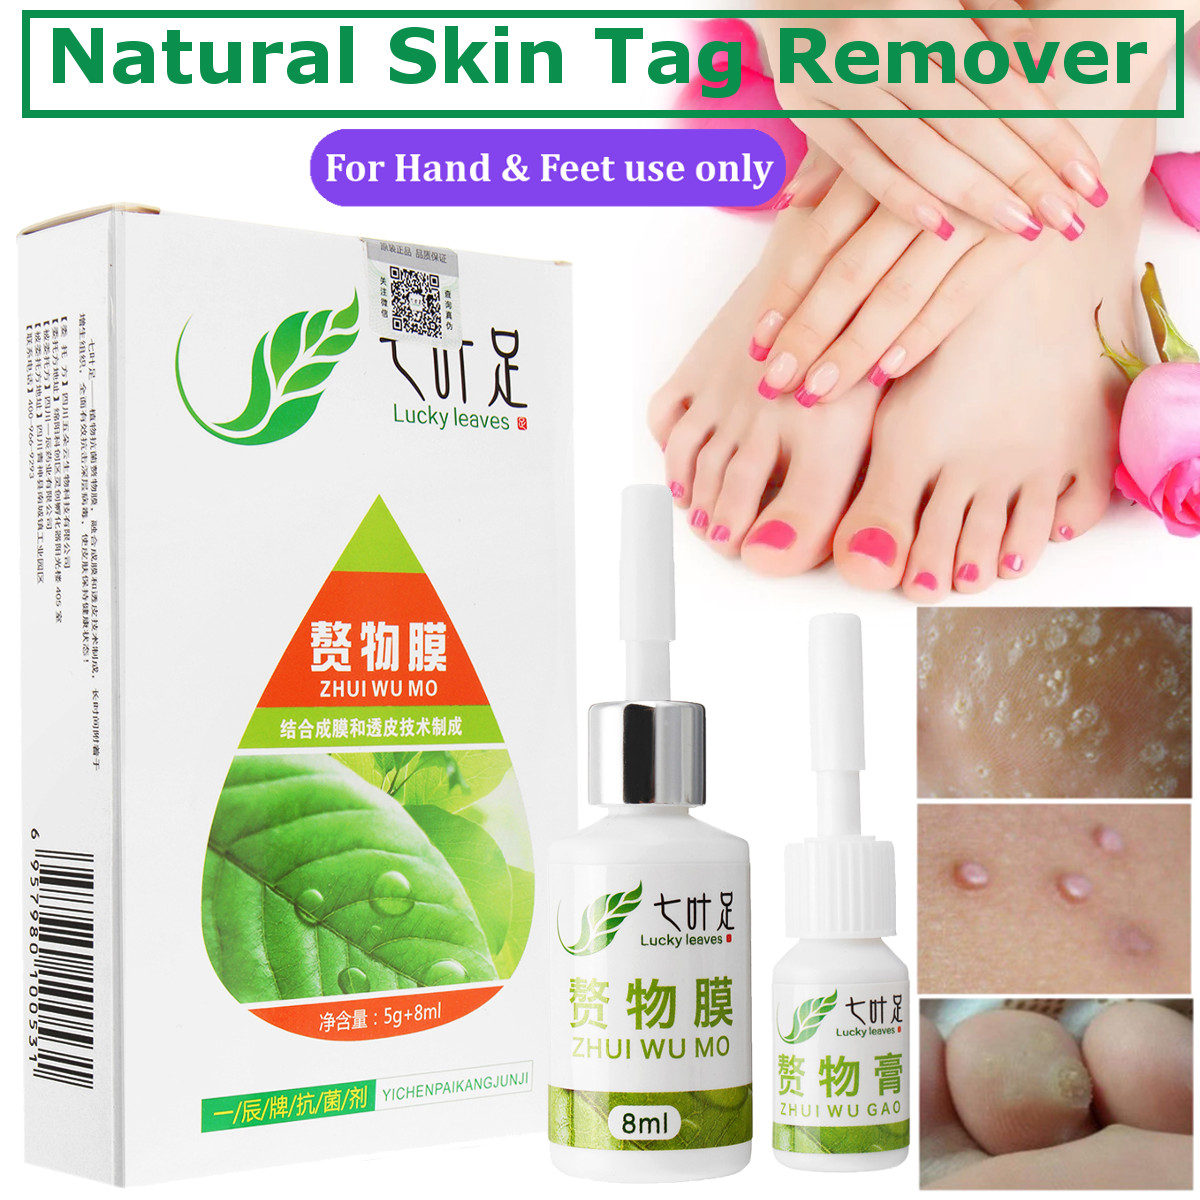 100-Natural-Solution-Foot-Cream-Skin-Tag-Remover-Hand-amp-Feet-Skin-Care-Kit-Set-1360605